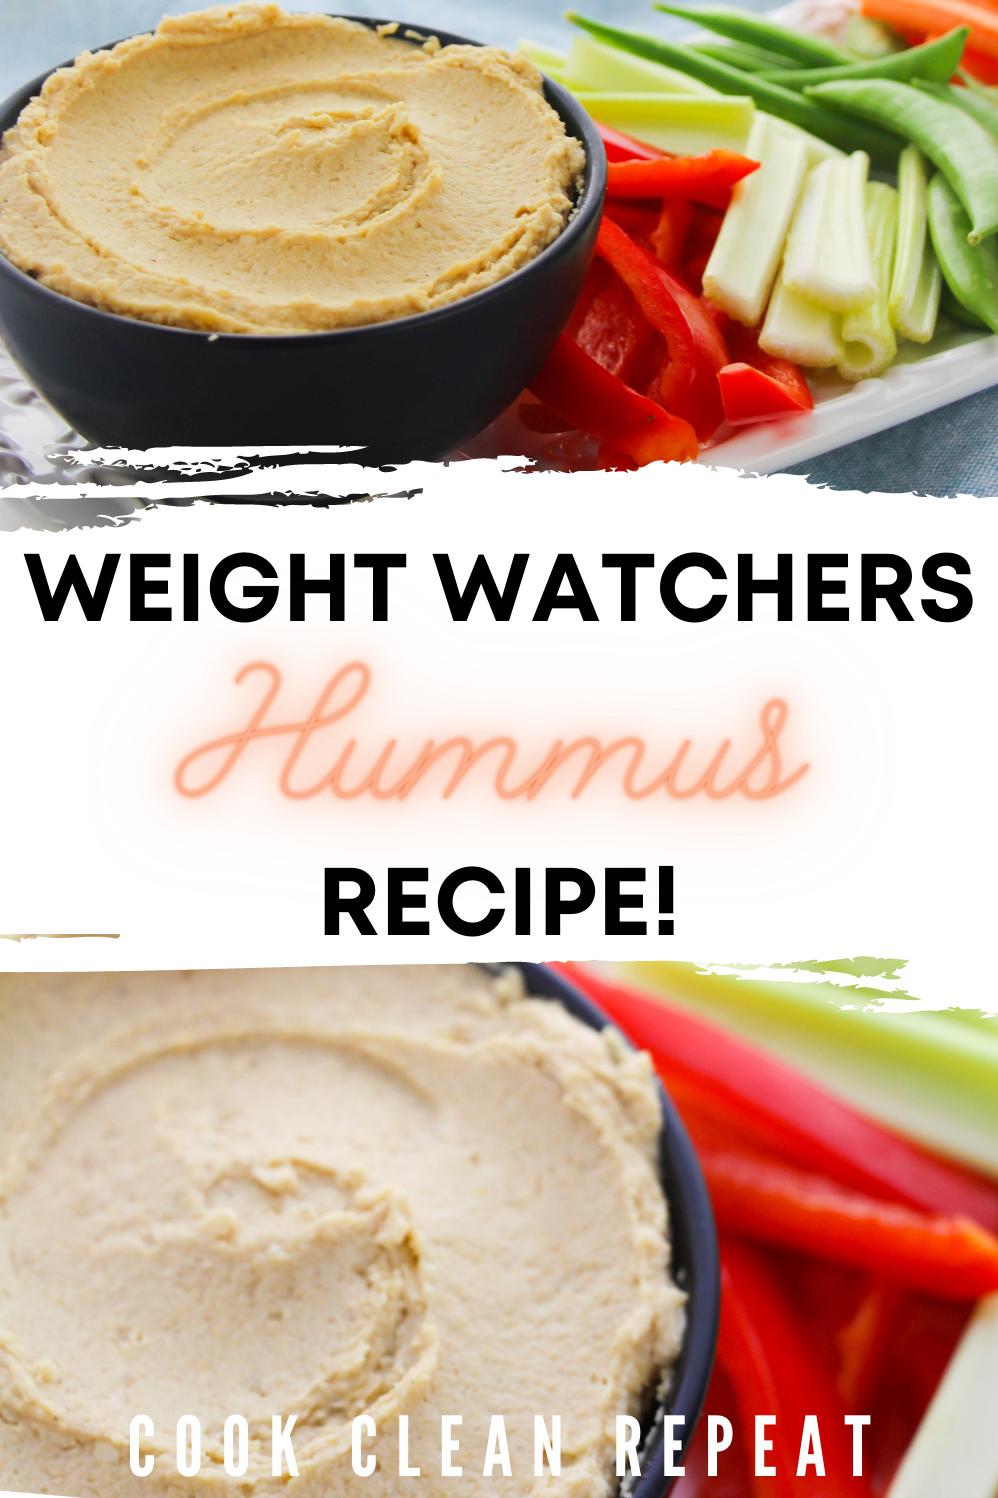  Low-fat doesn't have to mean low flavor - this hummus packs a punch